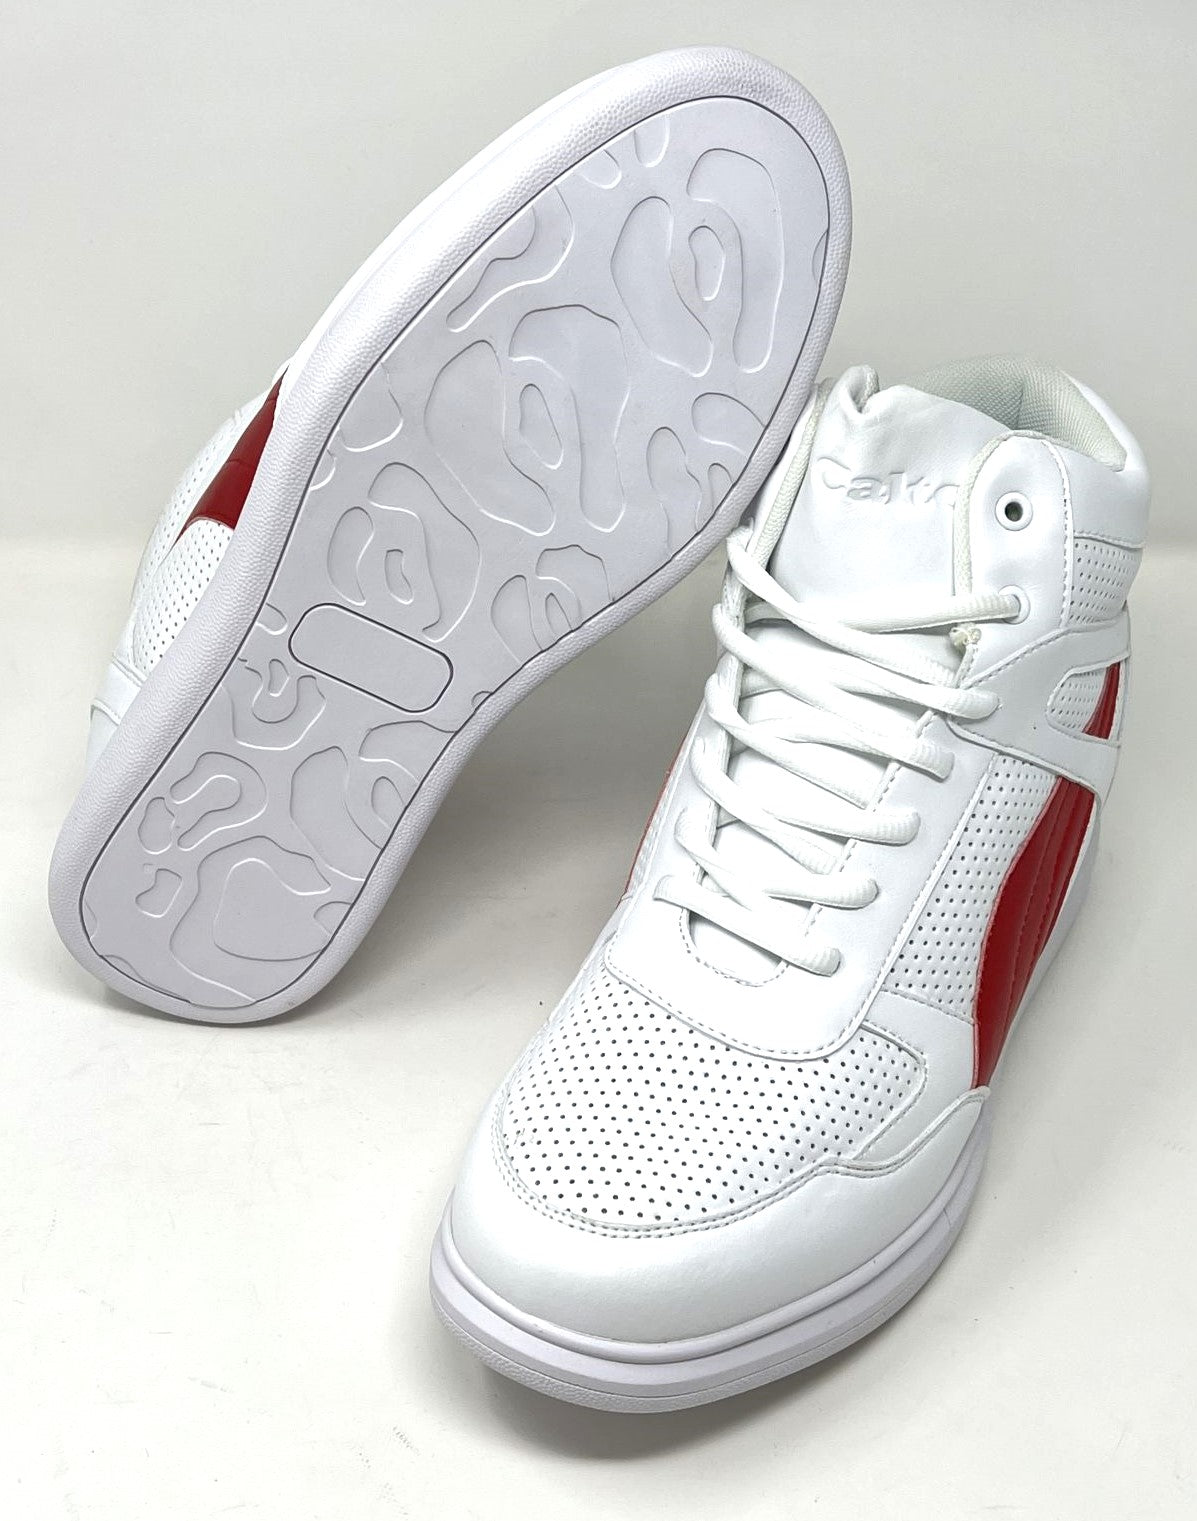 FSJ0074 - 3.8 Inches Taller (White/Red) - Size 9 Only